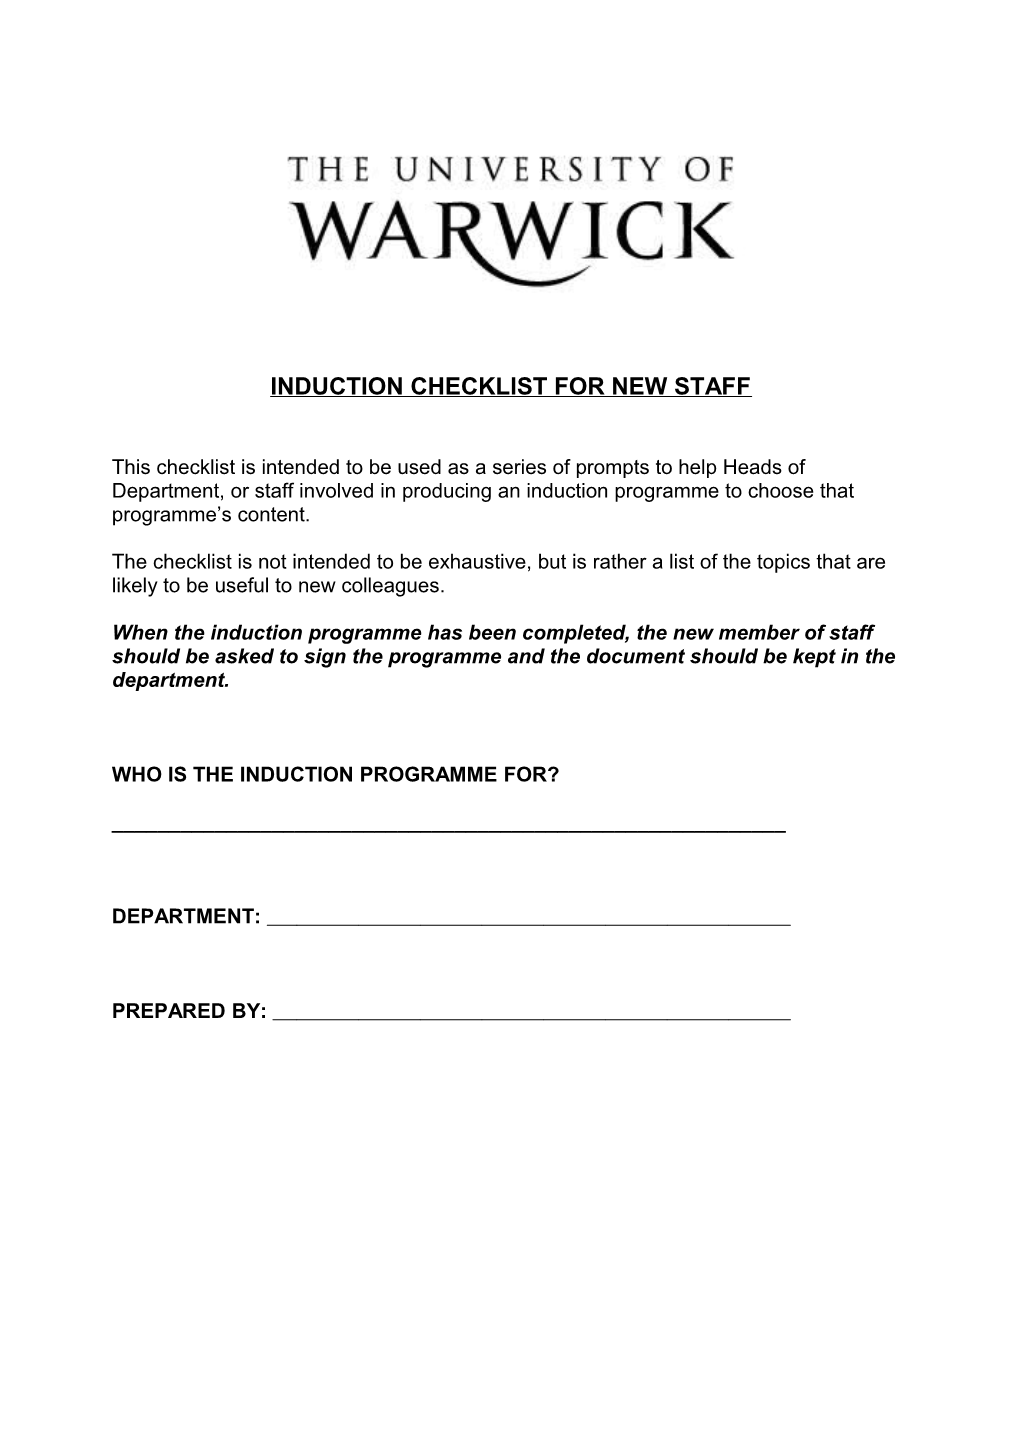 Induction Checklist for New Starters